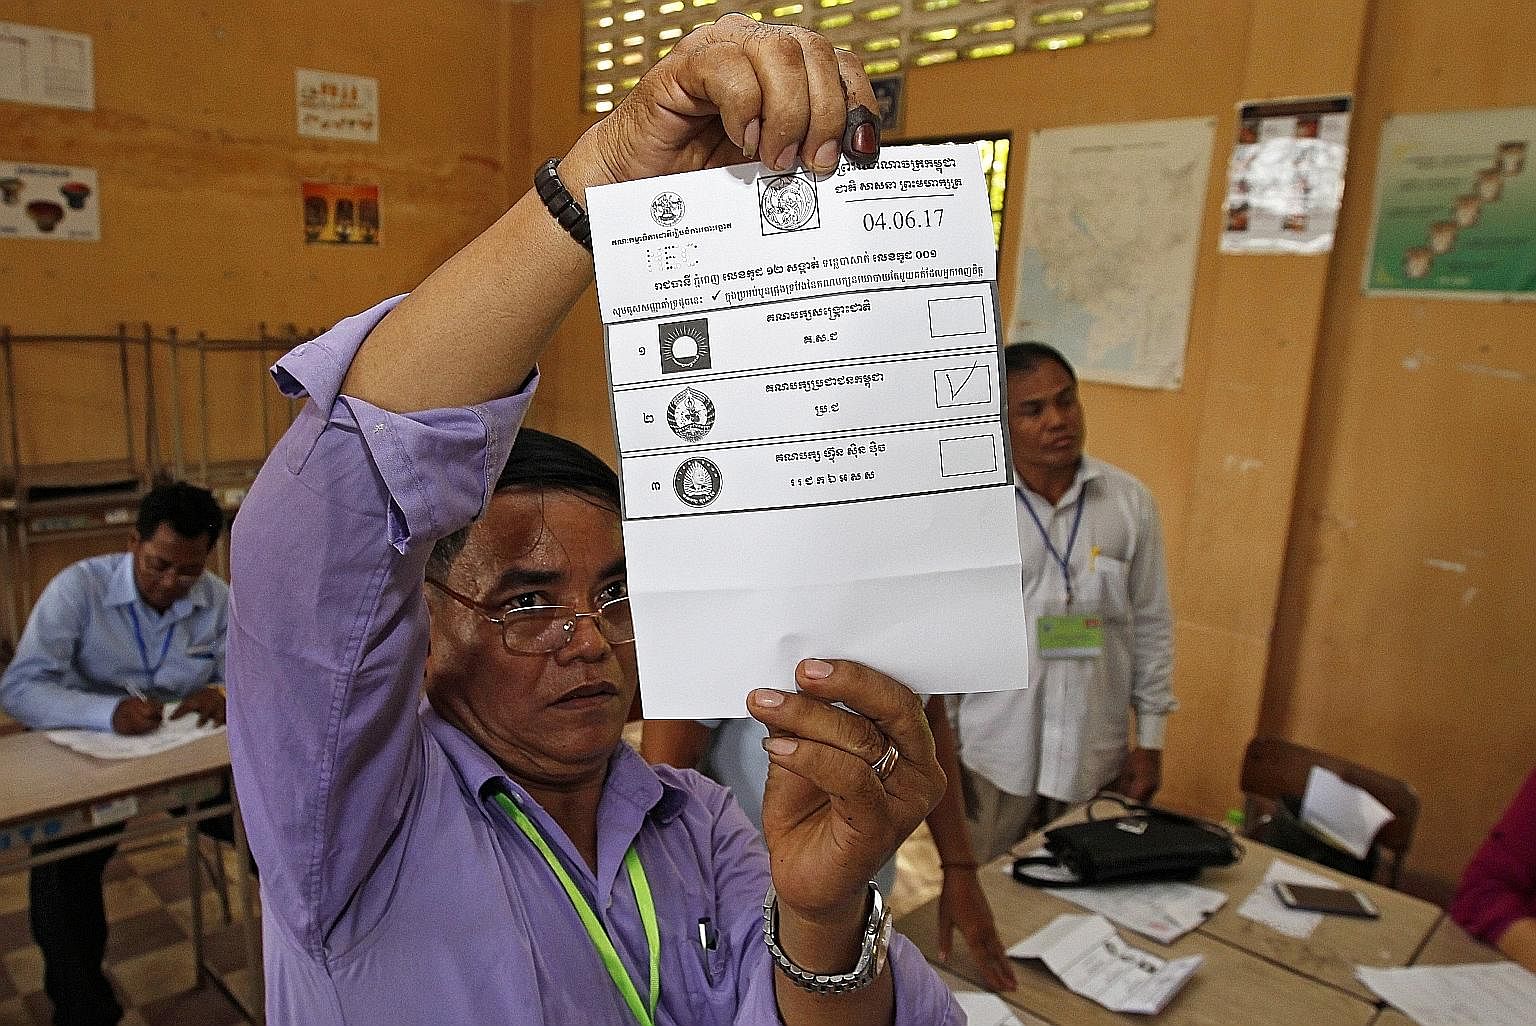 Sunday's commune polls in Cambodia were widely seen as a gauge of public sentiment in the lead-up to the more significant general election next year.